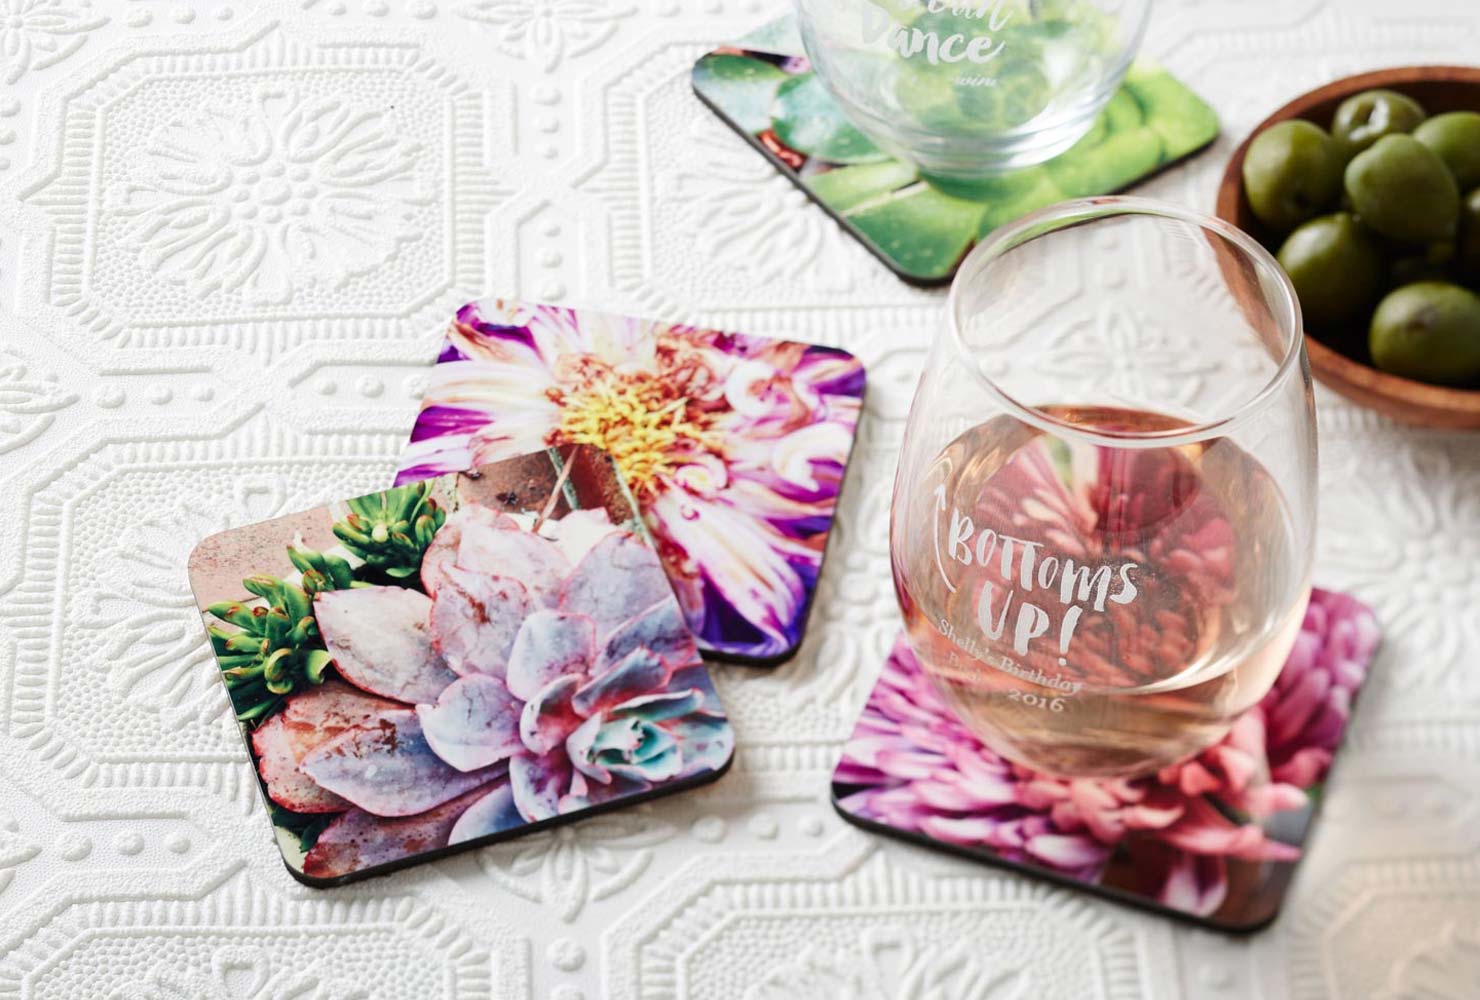 Stemless wine glasses and coasters.